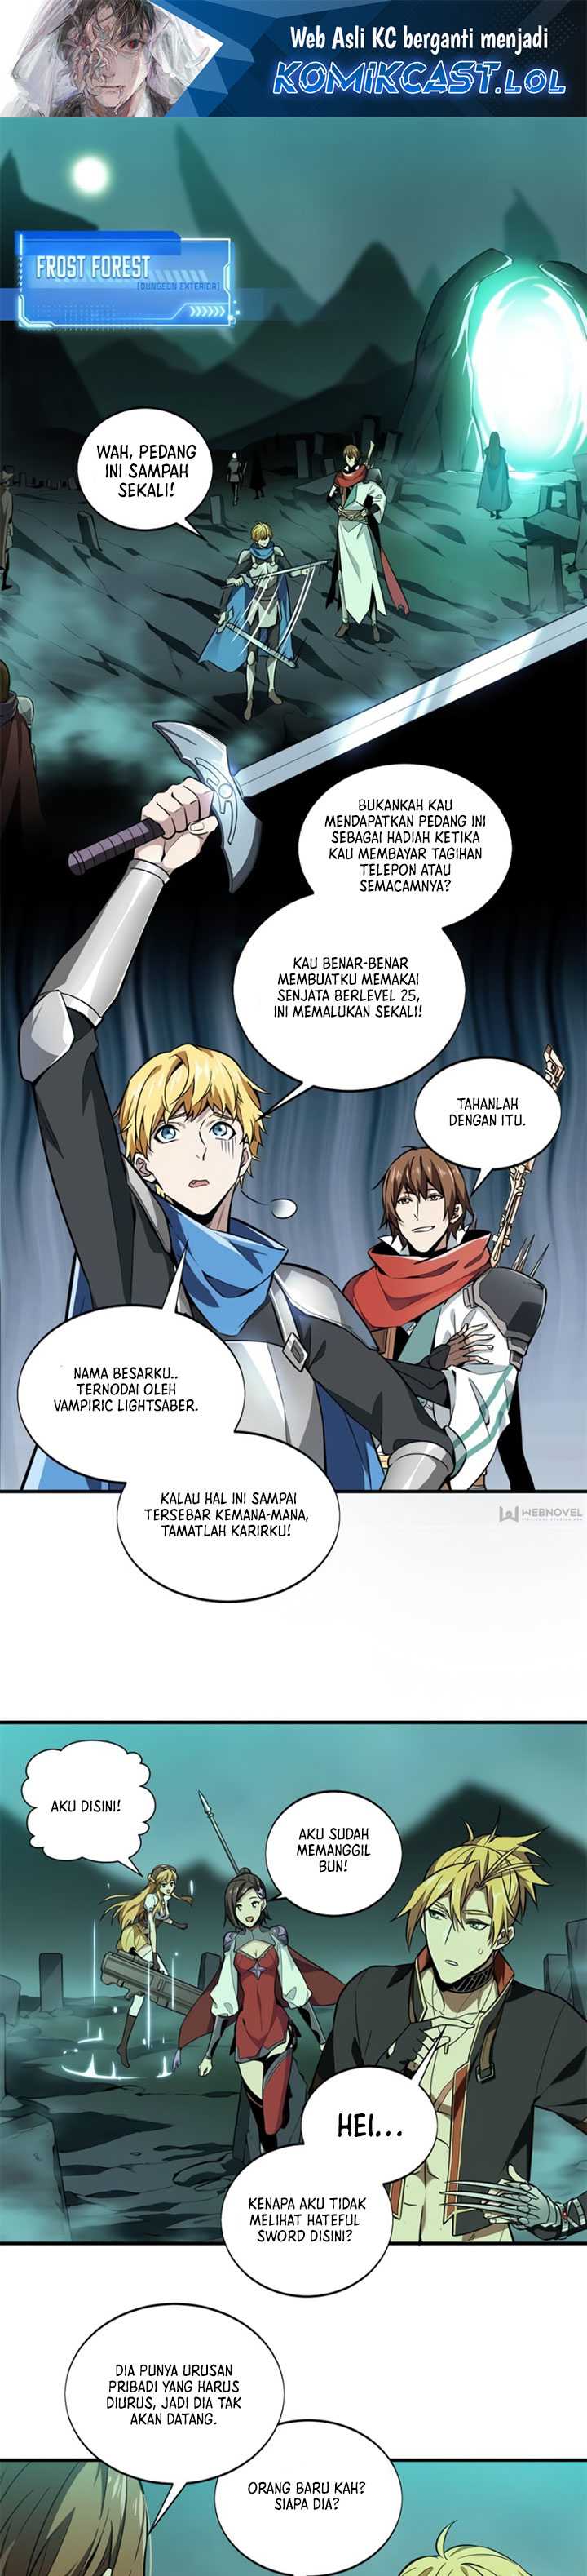 The King’s Avatar Chapter 55